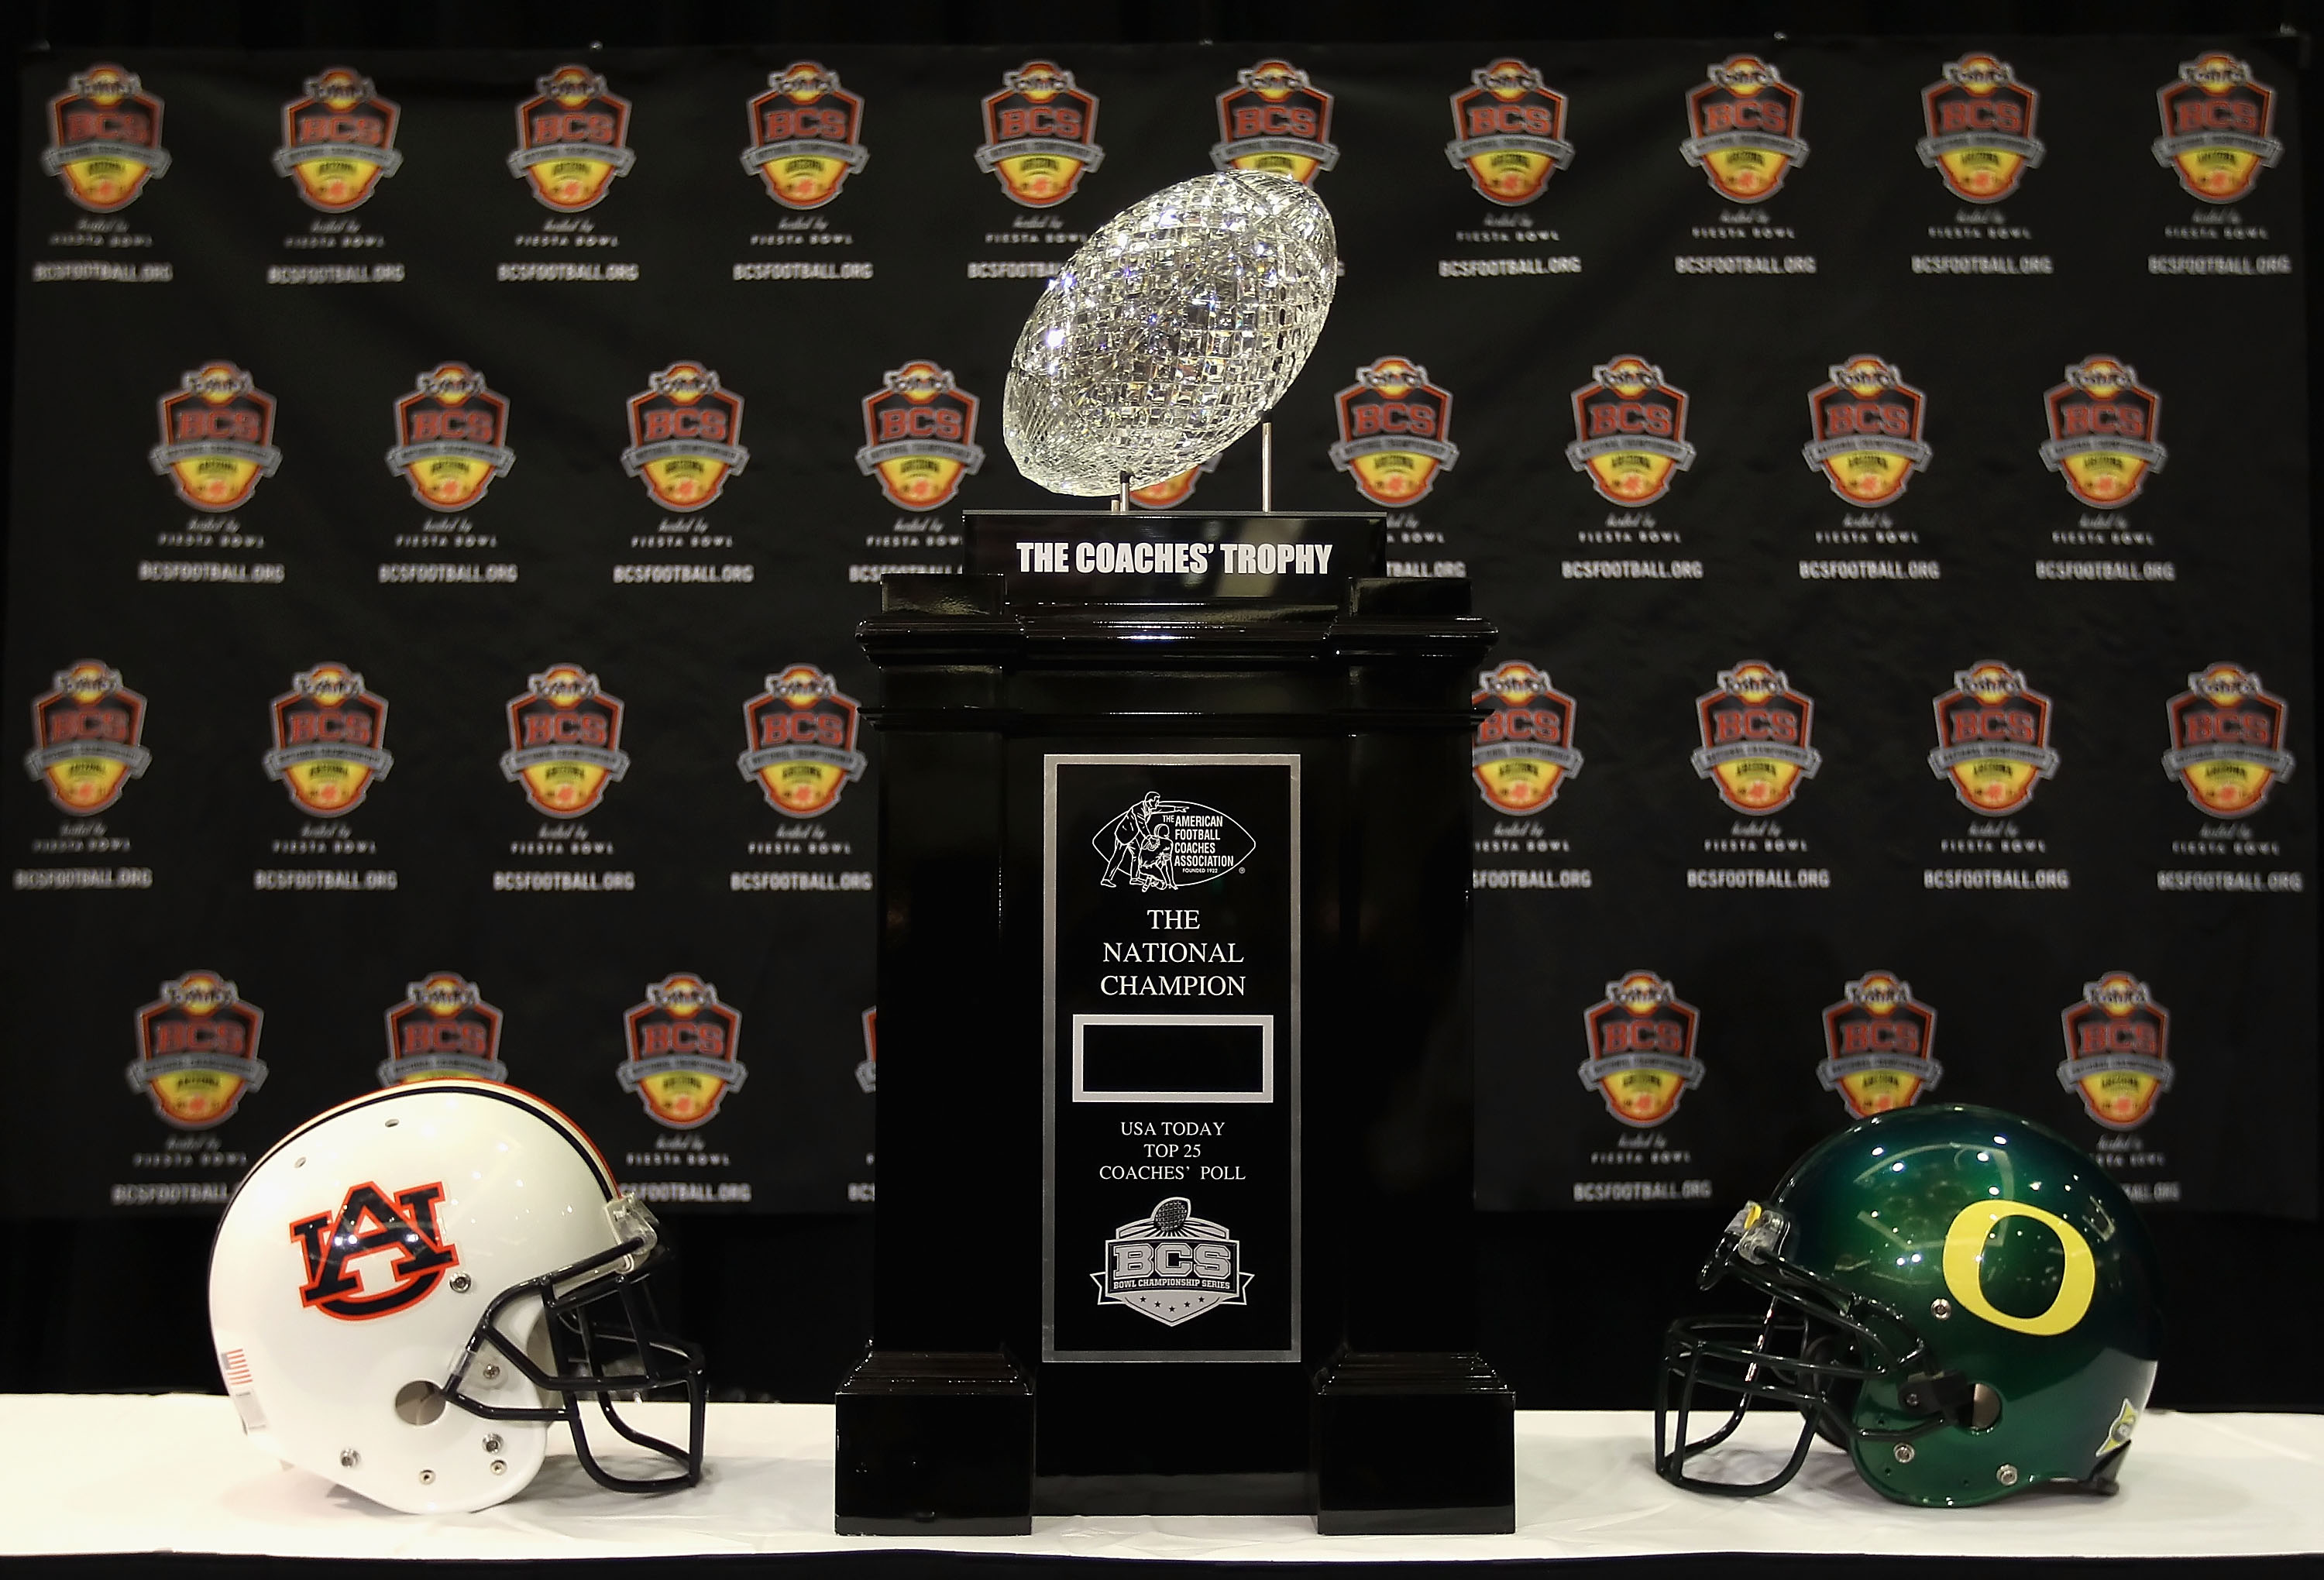 BCS Championship 2011: Breaking Down Auburn vs. Oregon by Position, News,  Scores, Highlights, Stats, and Rumors